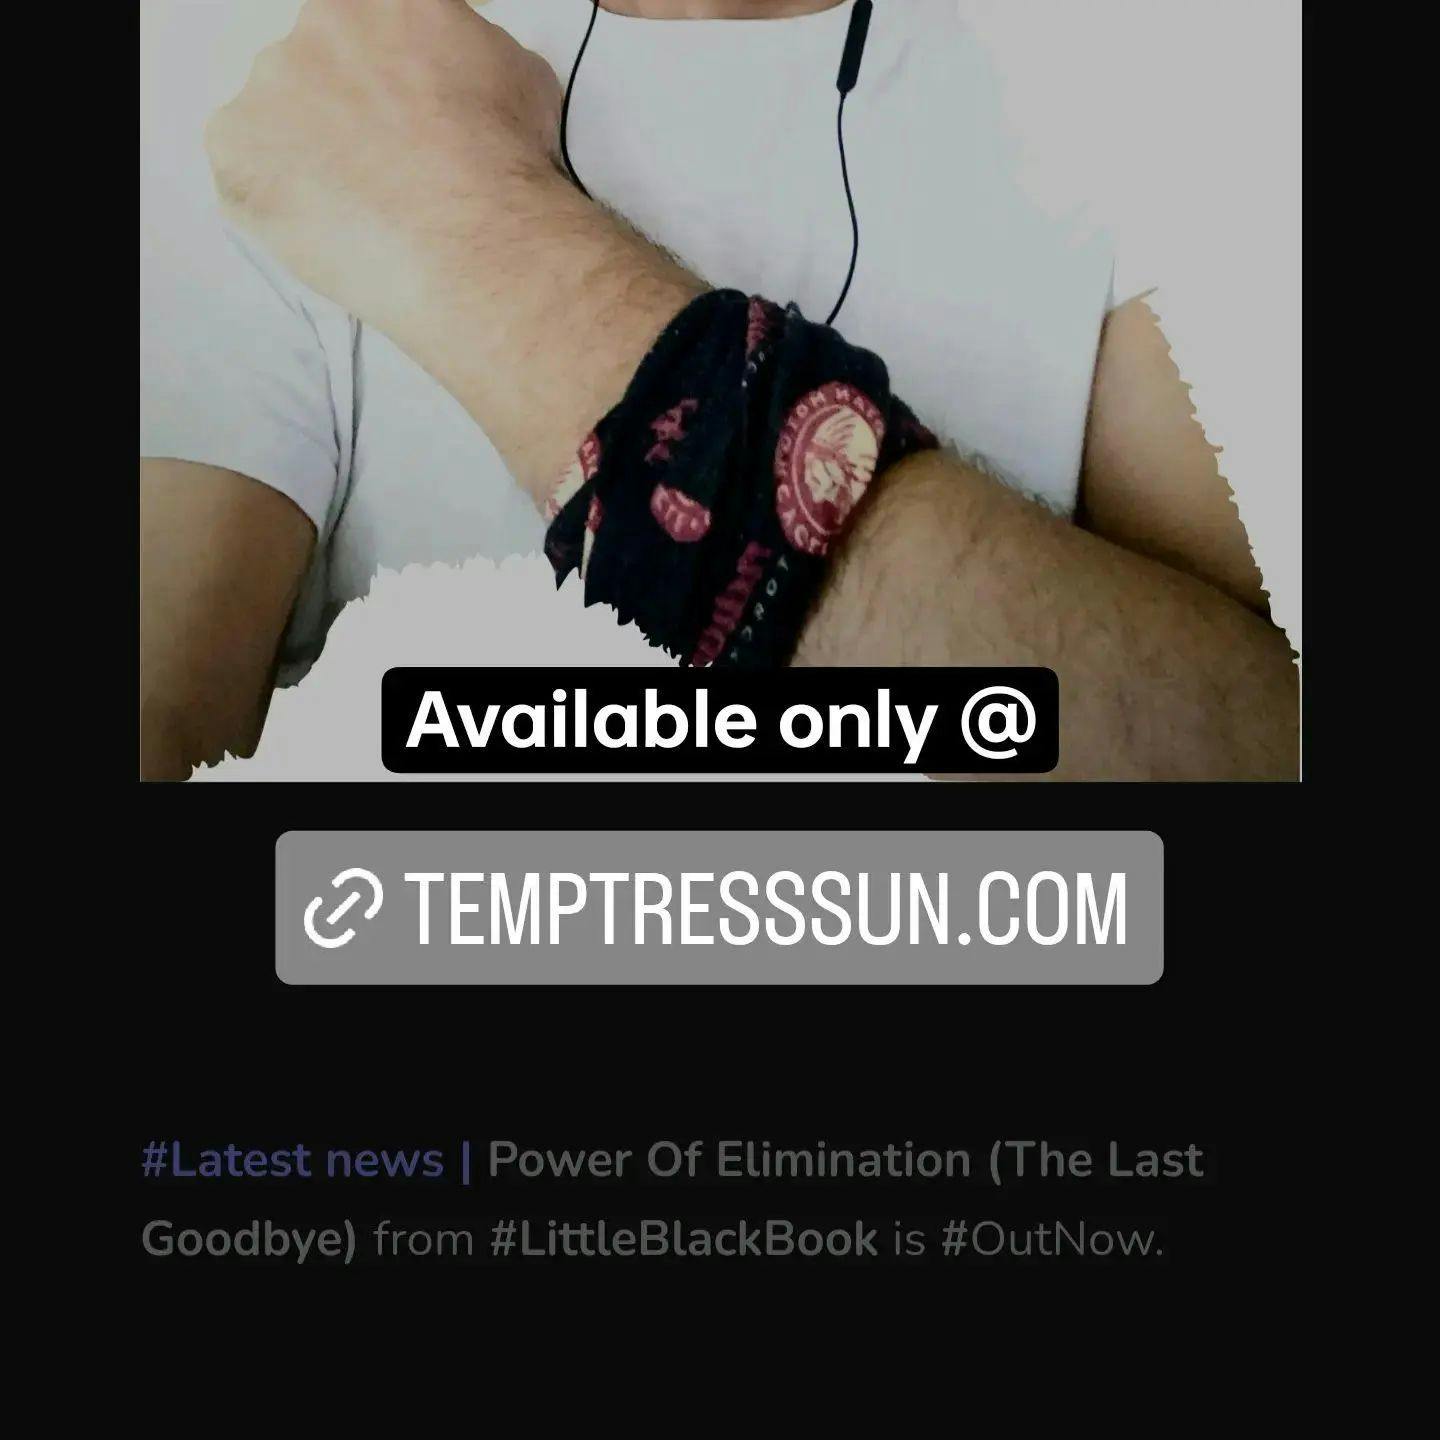 Power Of Elimination (The Last Goodbye) from #LittleBlackBook is
 #OutNow. Available only at https://temptresssun.com

#roots #beautiful #scenery #debate #endless_talks #uprising #lullaby #temptress #sun #temptresssun #music #album #outnow #nowplaying #photography #youtube #Spotify #SoundCloud #bandcamp #AppleMusic #reverbnation #anghami #Twitter #thoughts #poetry #cairo #Egypt 

​